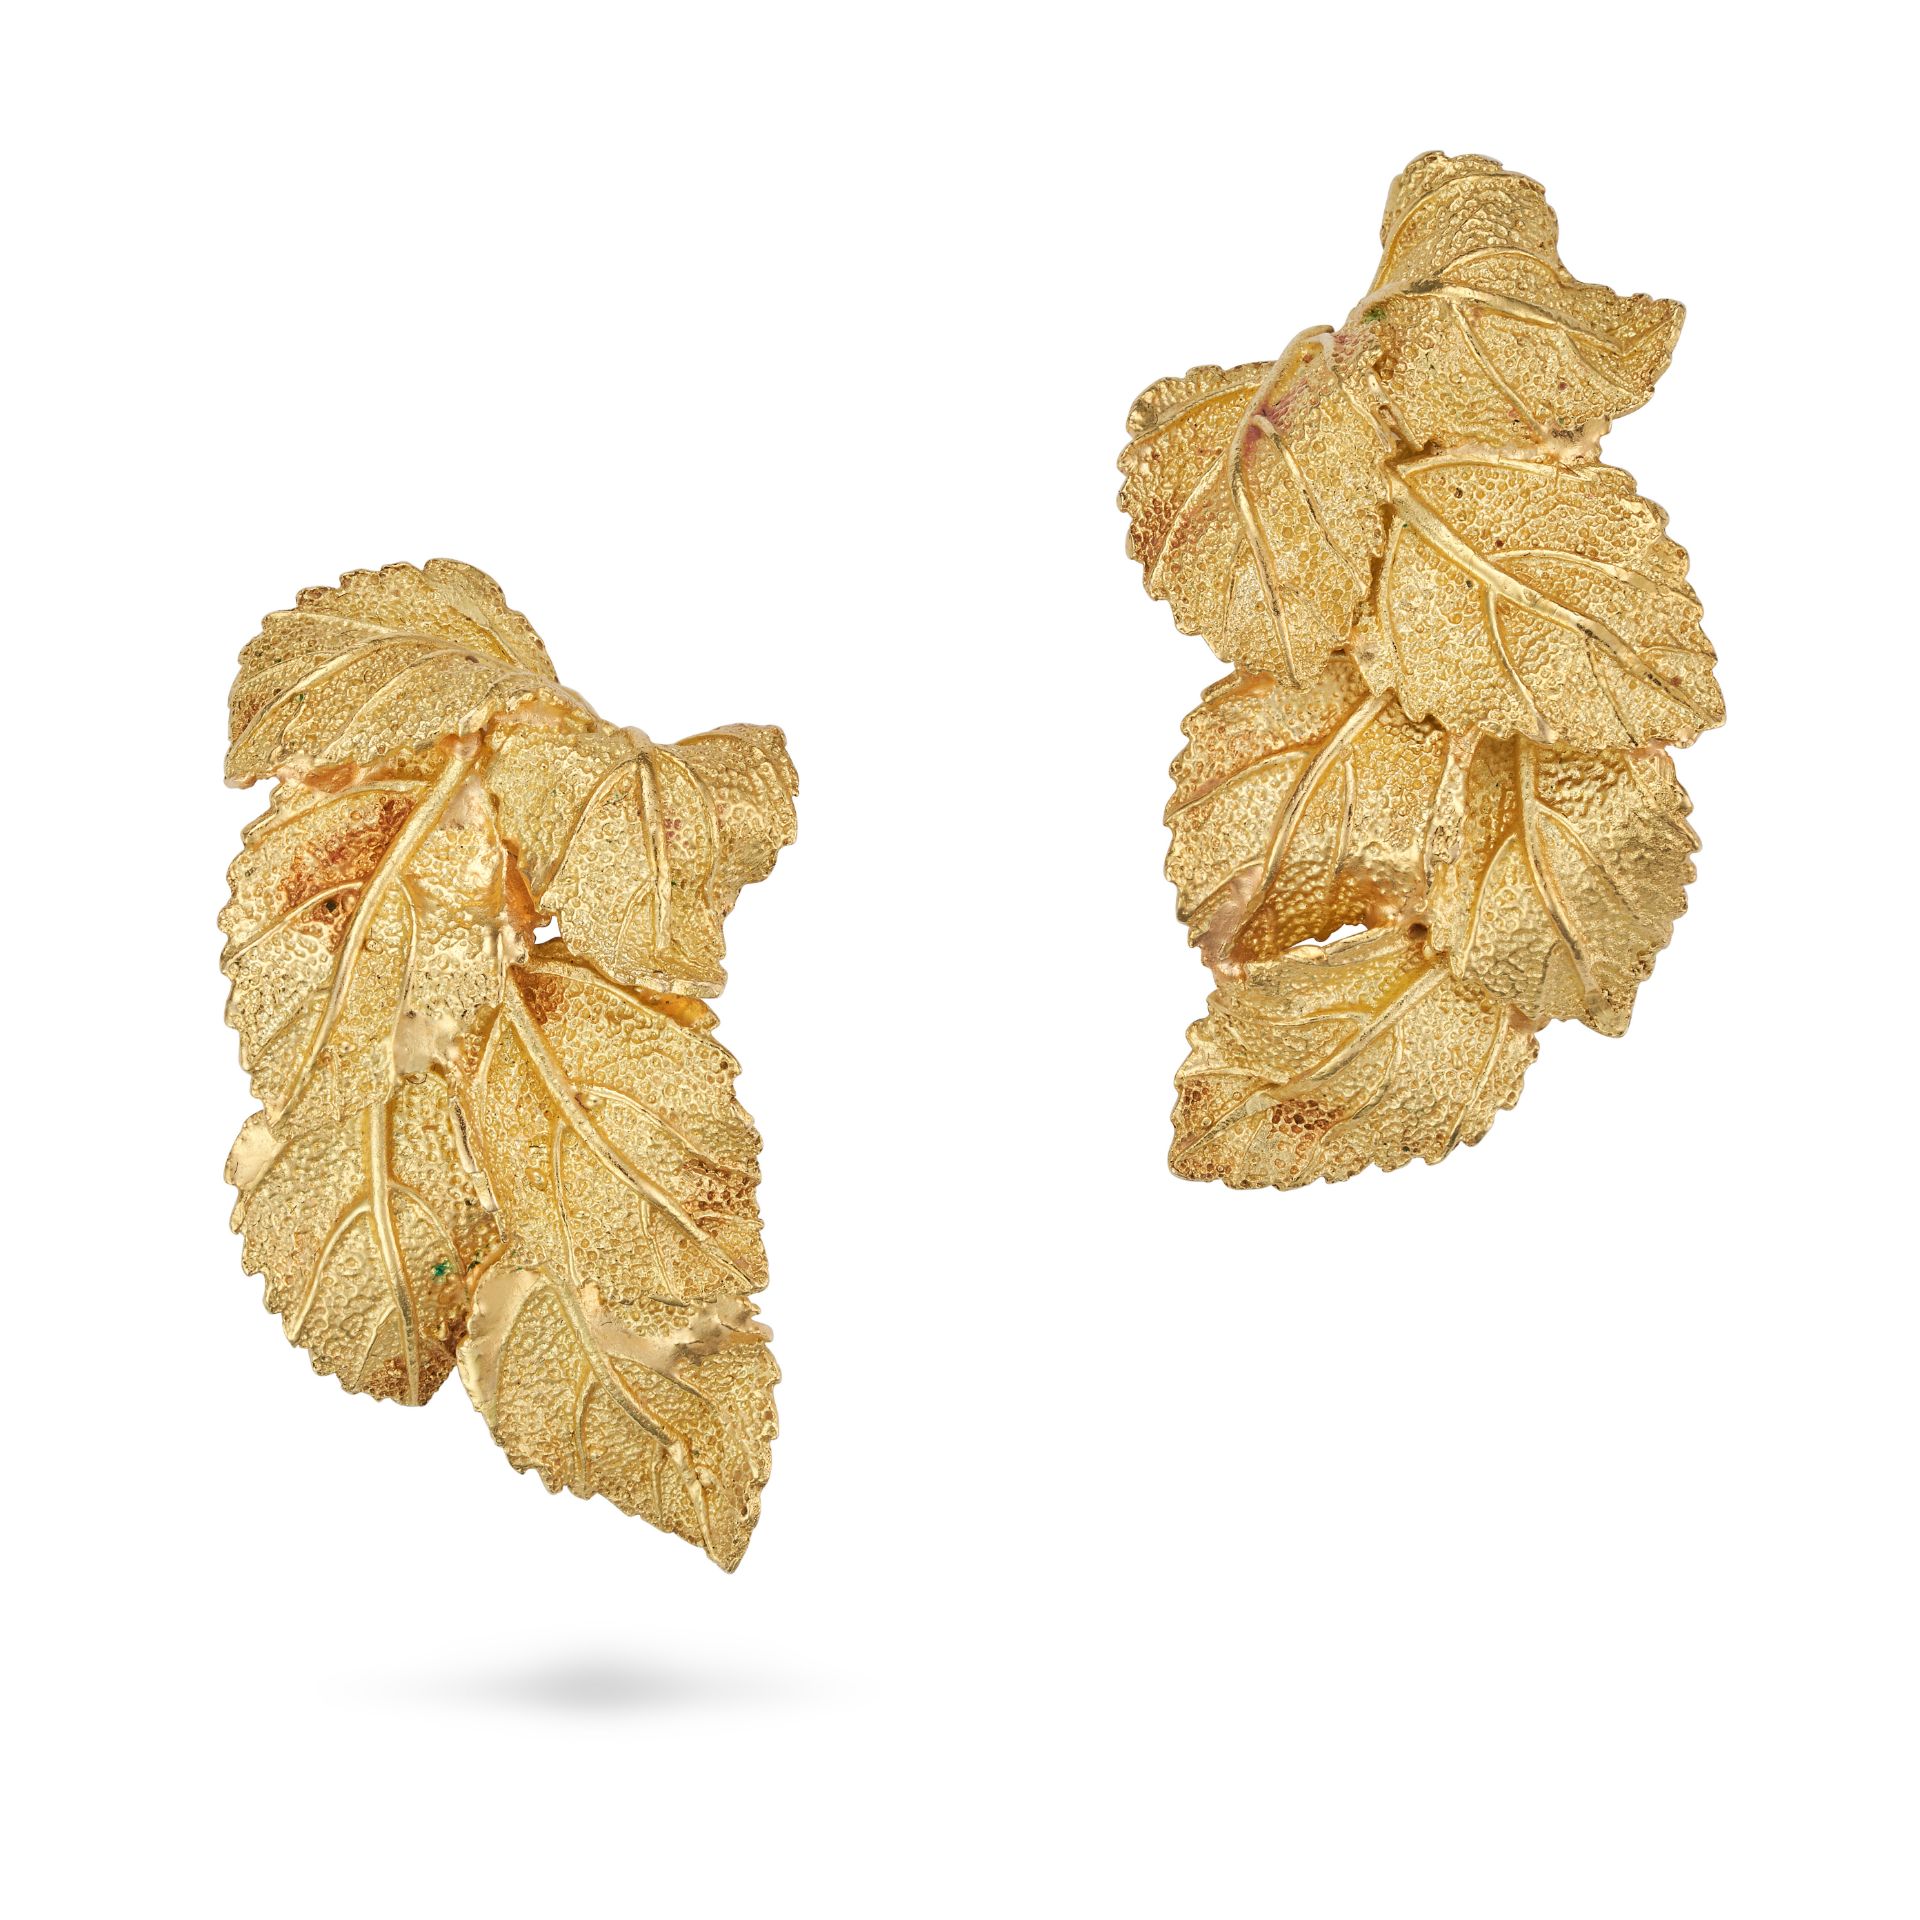 A PAIR OF LEAF EARRINGS in yellow gold, each designed as a spray of textured leaves, French impor...